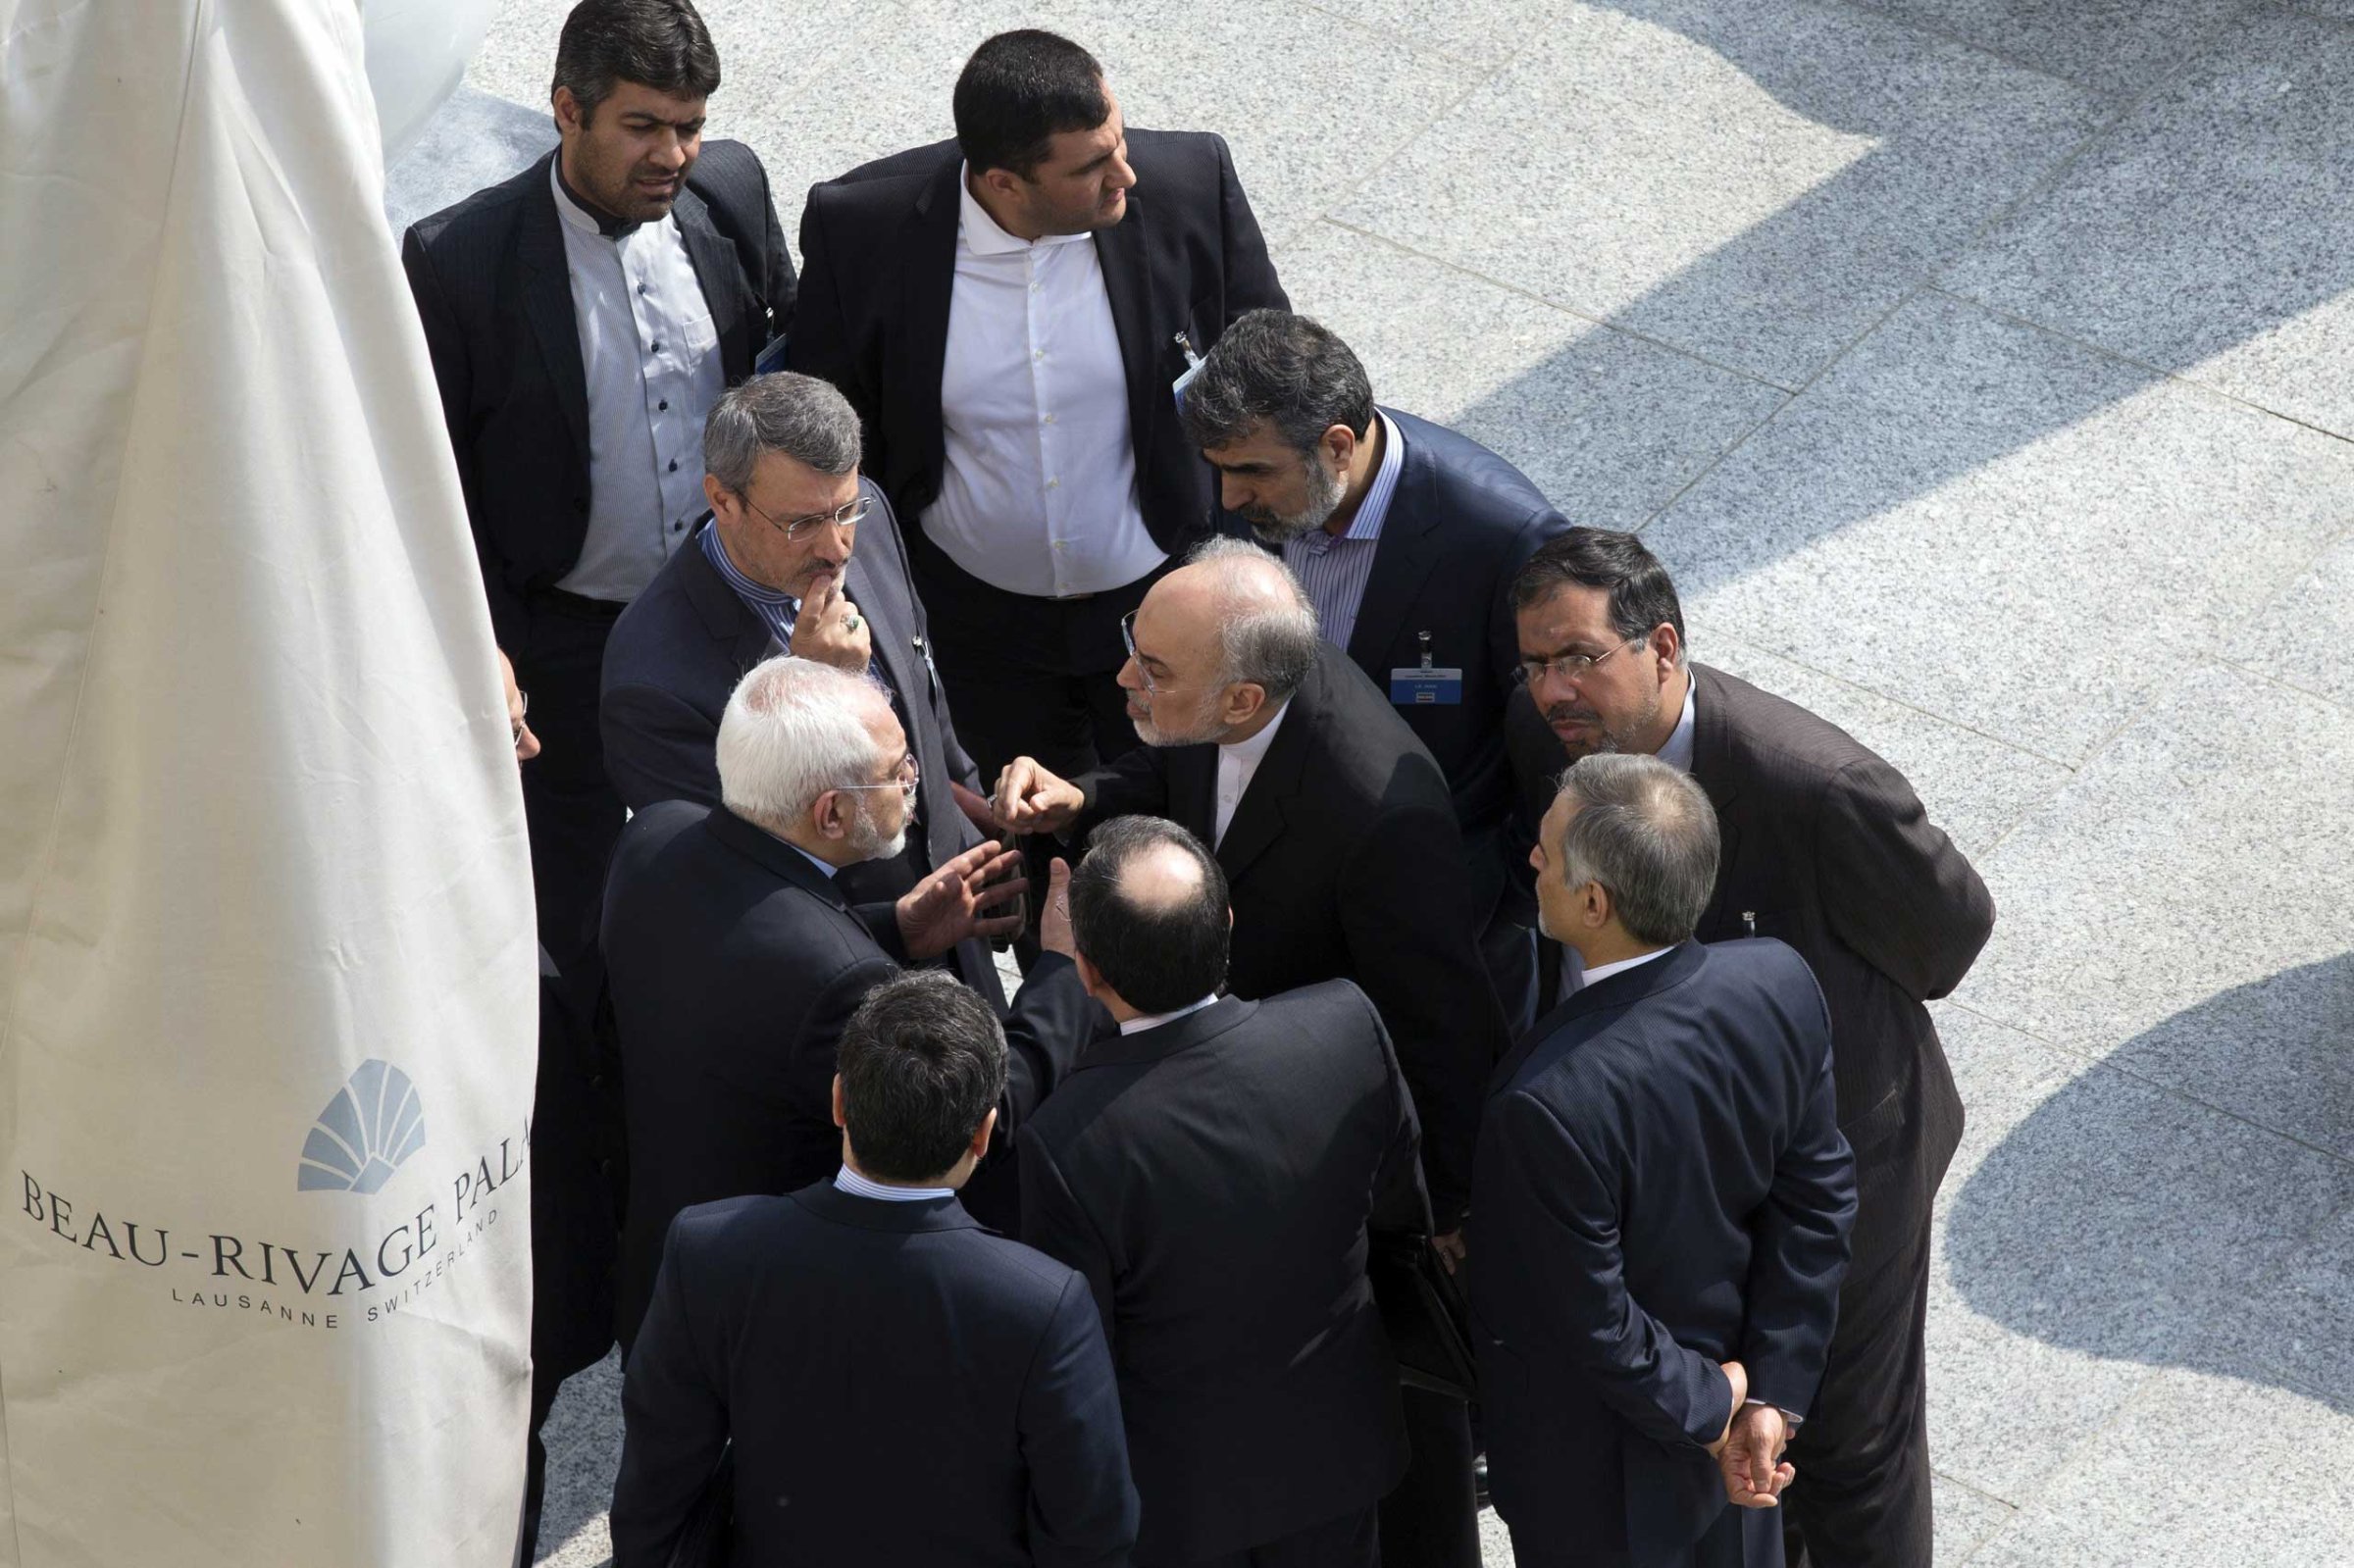 Iran's Foreign Minister Mohammad Javad Zarif, center, and head of the Atomic Energy Organization of Iran Ali Akbar Salehi, center right, talk outside with aides after a morning negotiation session with U.S. Secretary of State John Kerry over Iran's nuclear programme in Lausanne, Switzerland, March 19, 2015.